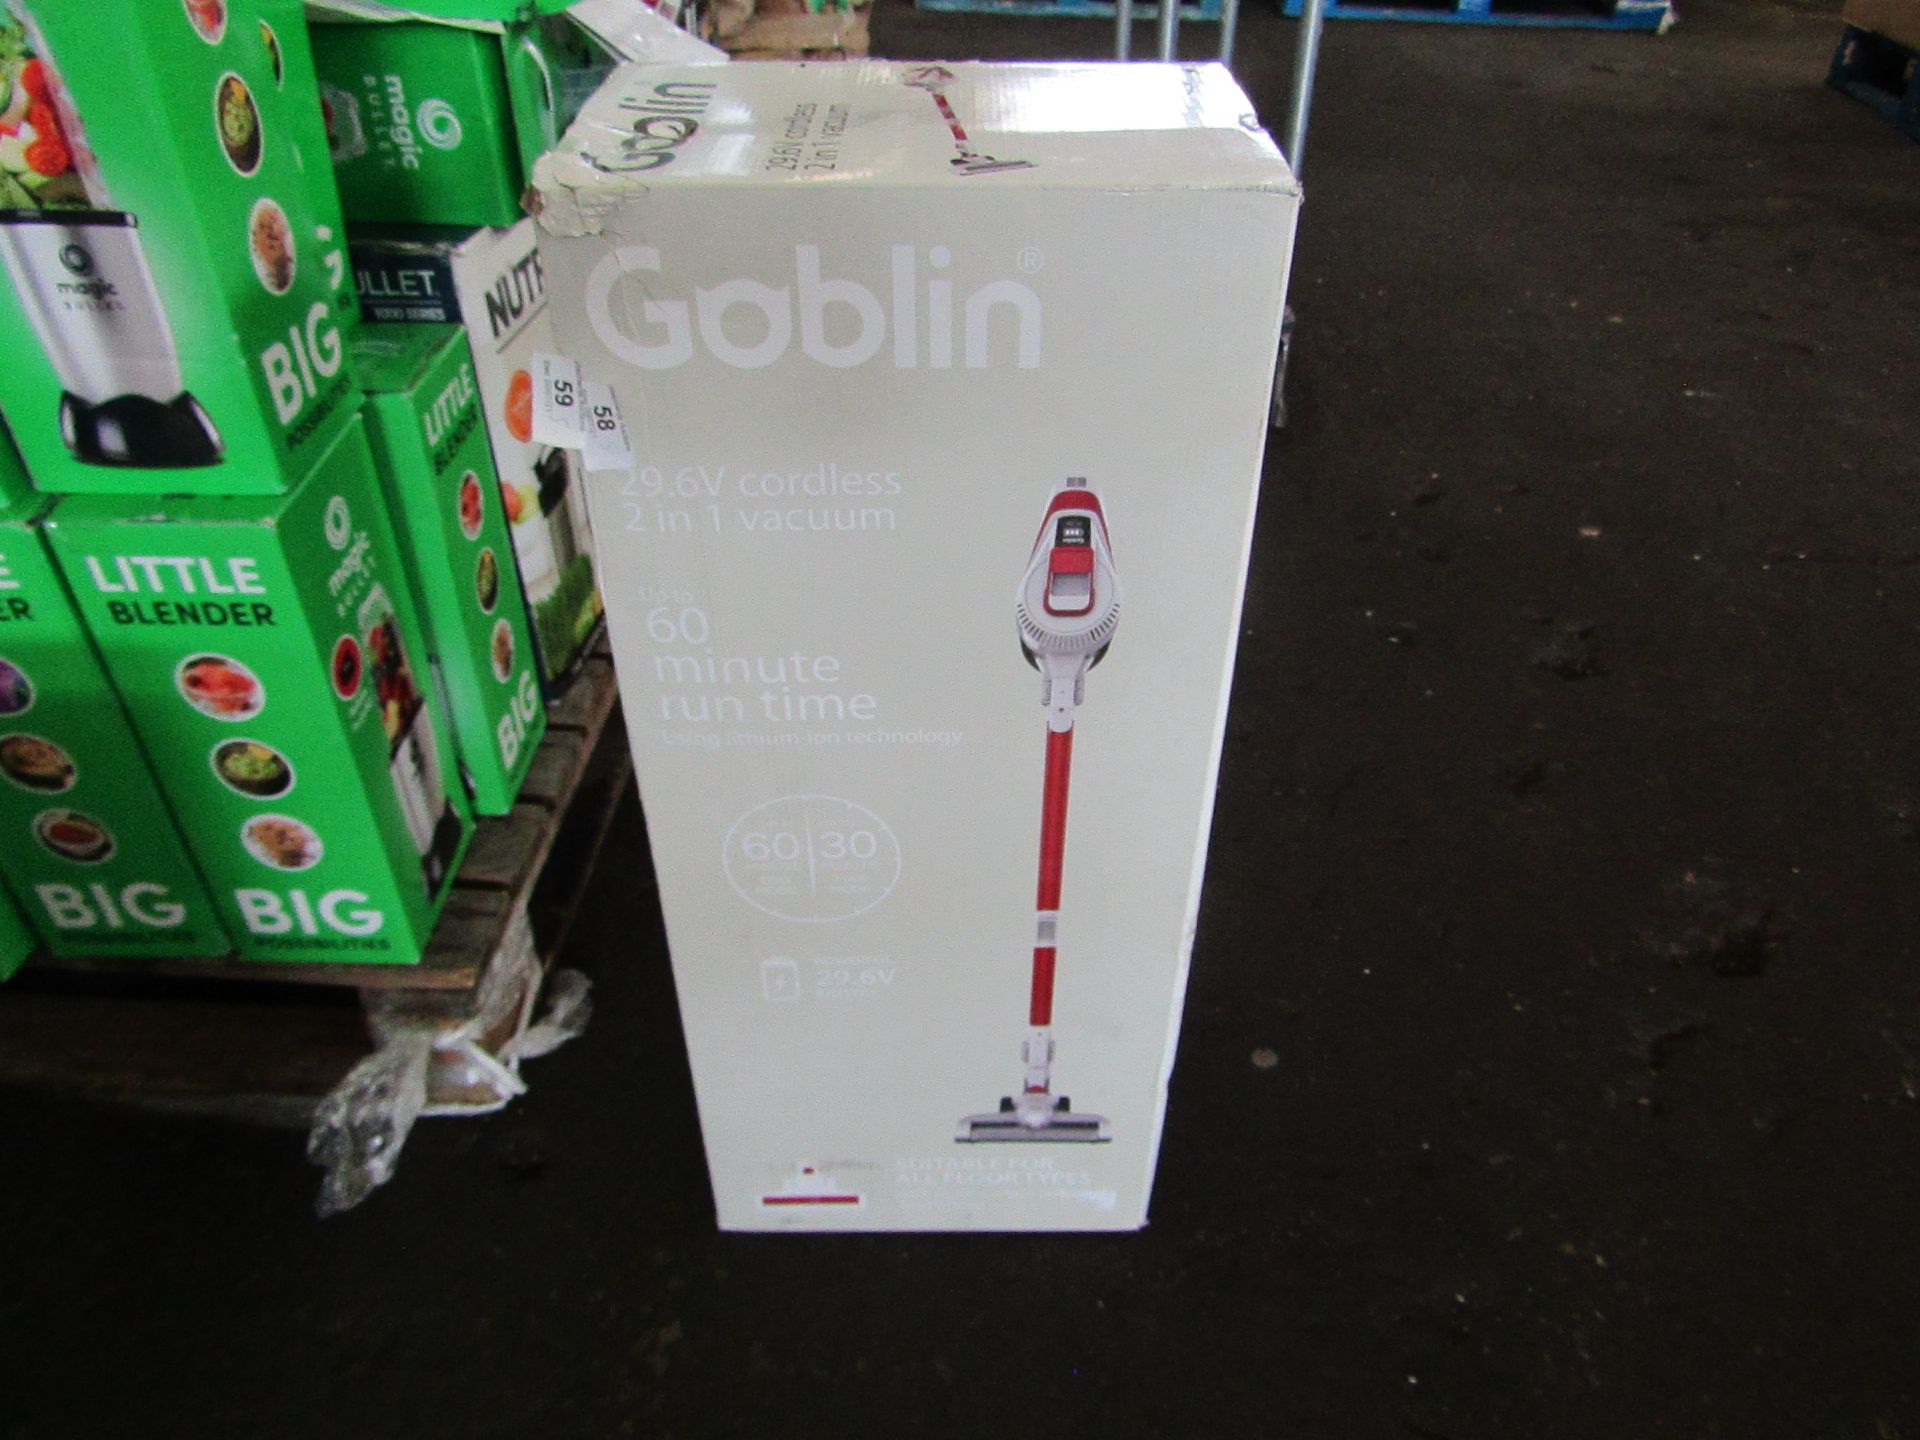 | 5X | GOBLIN 29.6V CORDLESS 2 IN 1 VACUUM | UNCHECKED AND BOXED | NO ONLINE RESALE | SKU